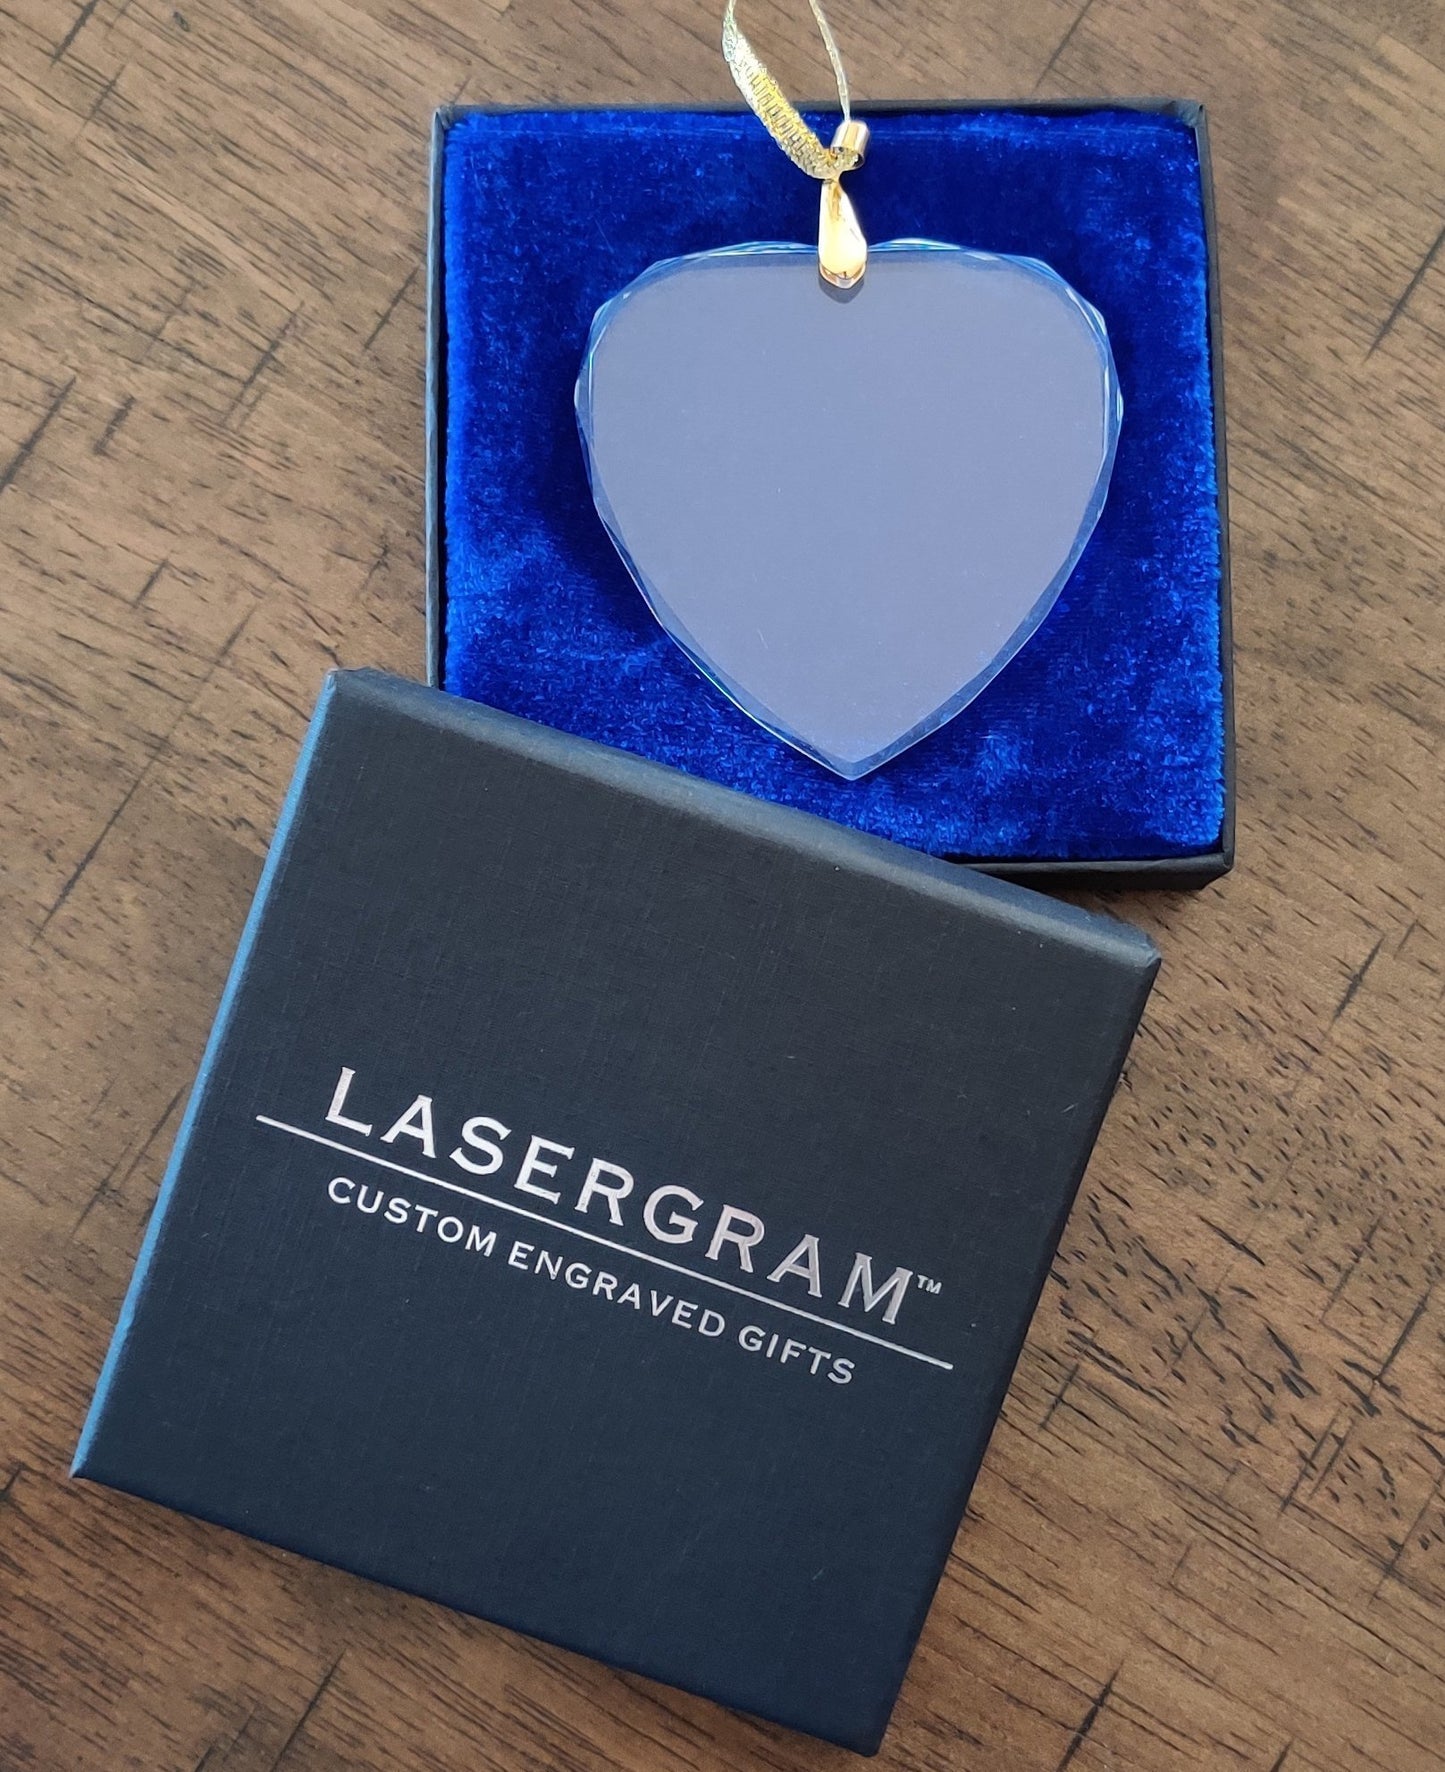 LaserGram Christmas Ornament, Running Woman, Personalized Engraving Included (Heart Shape)